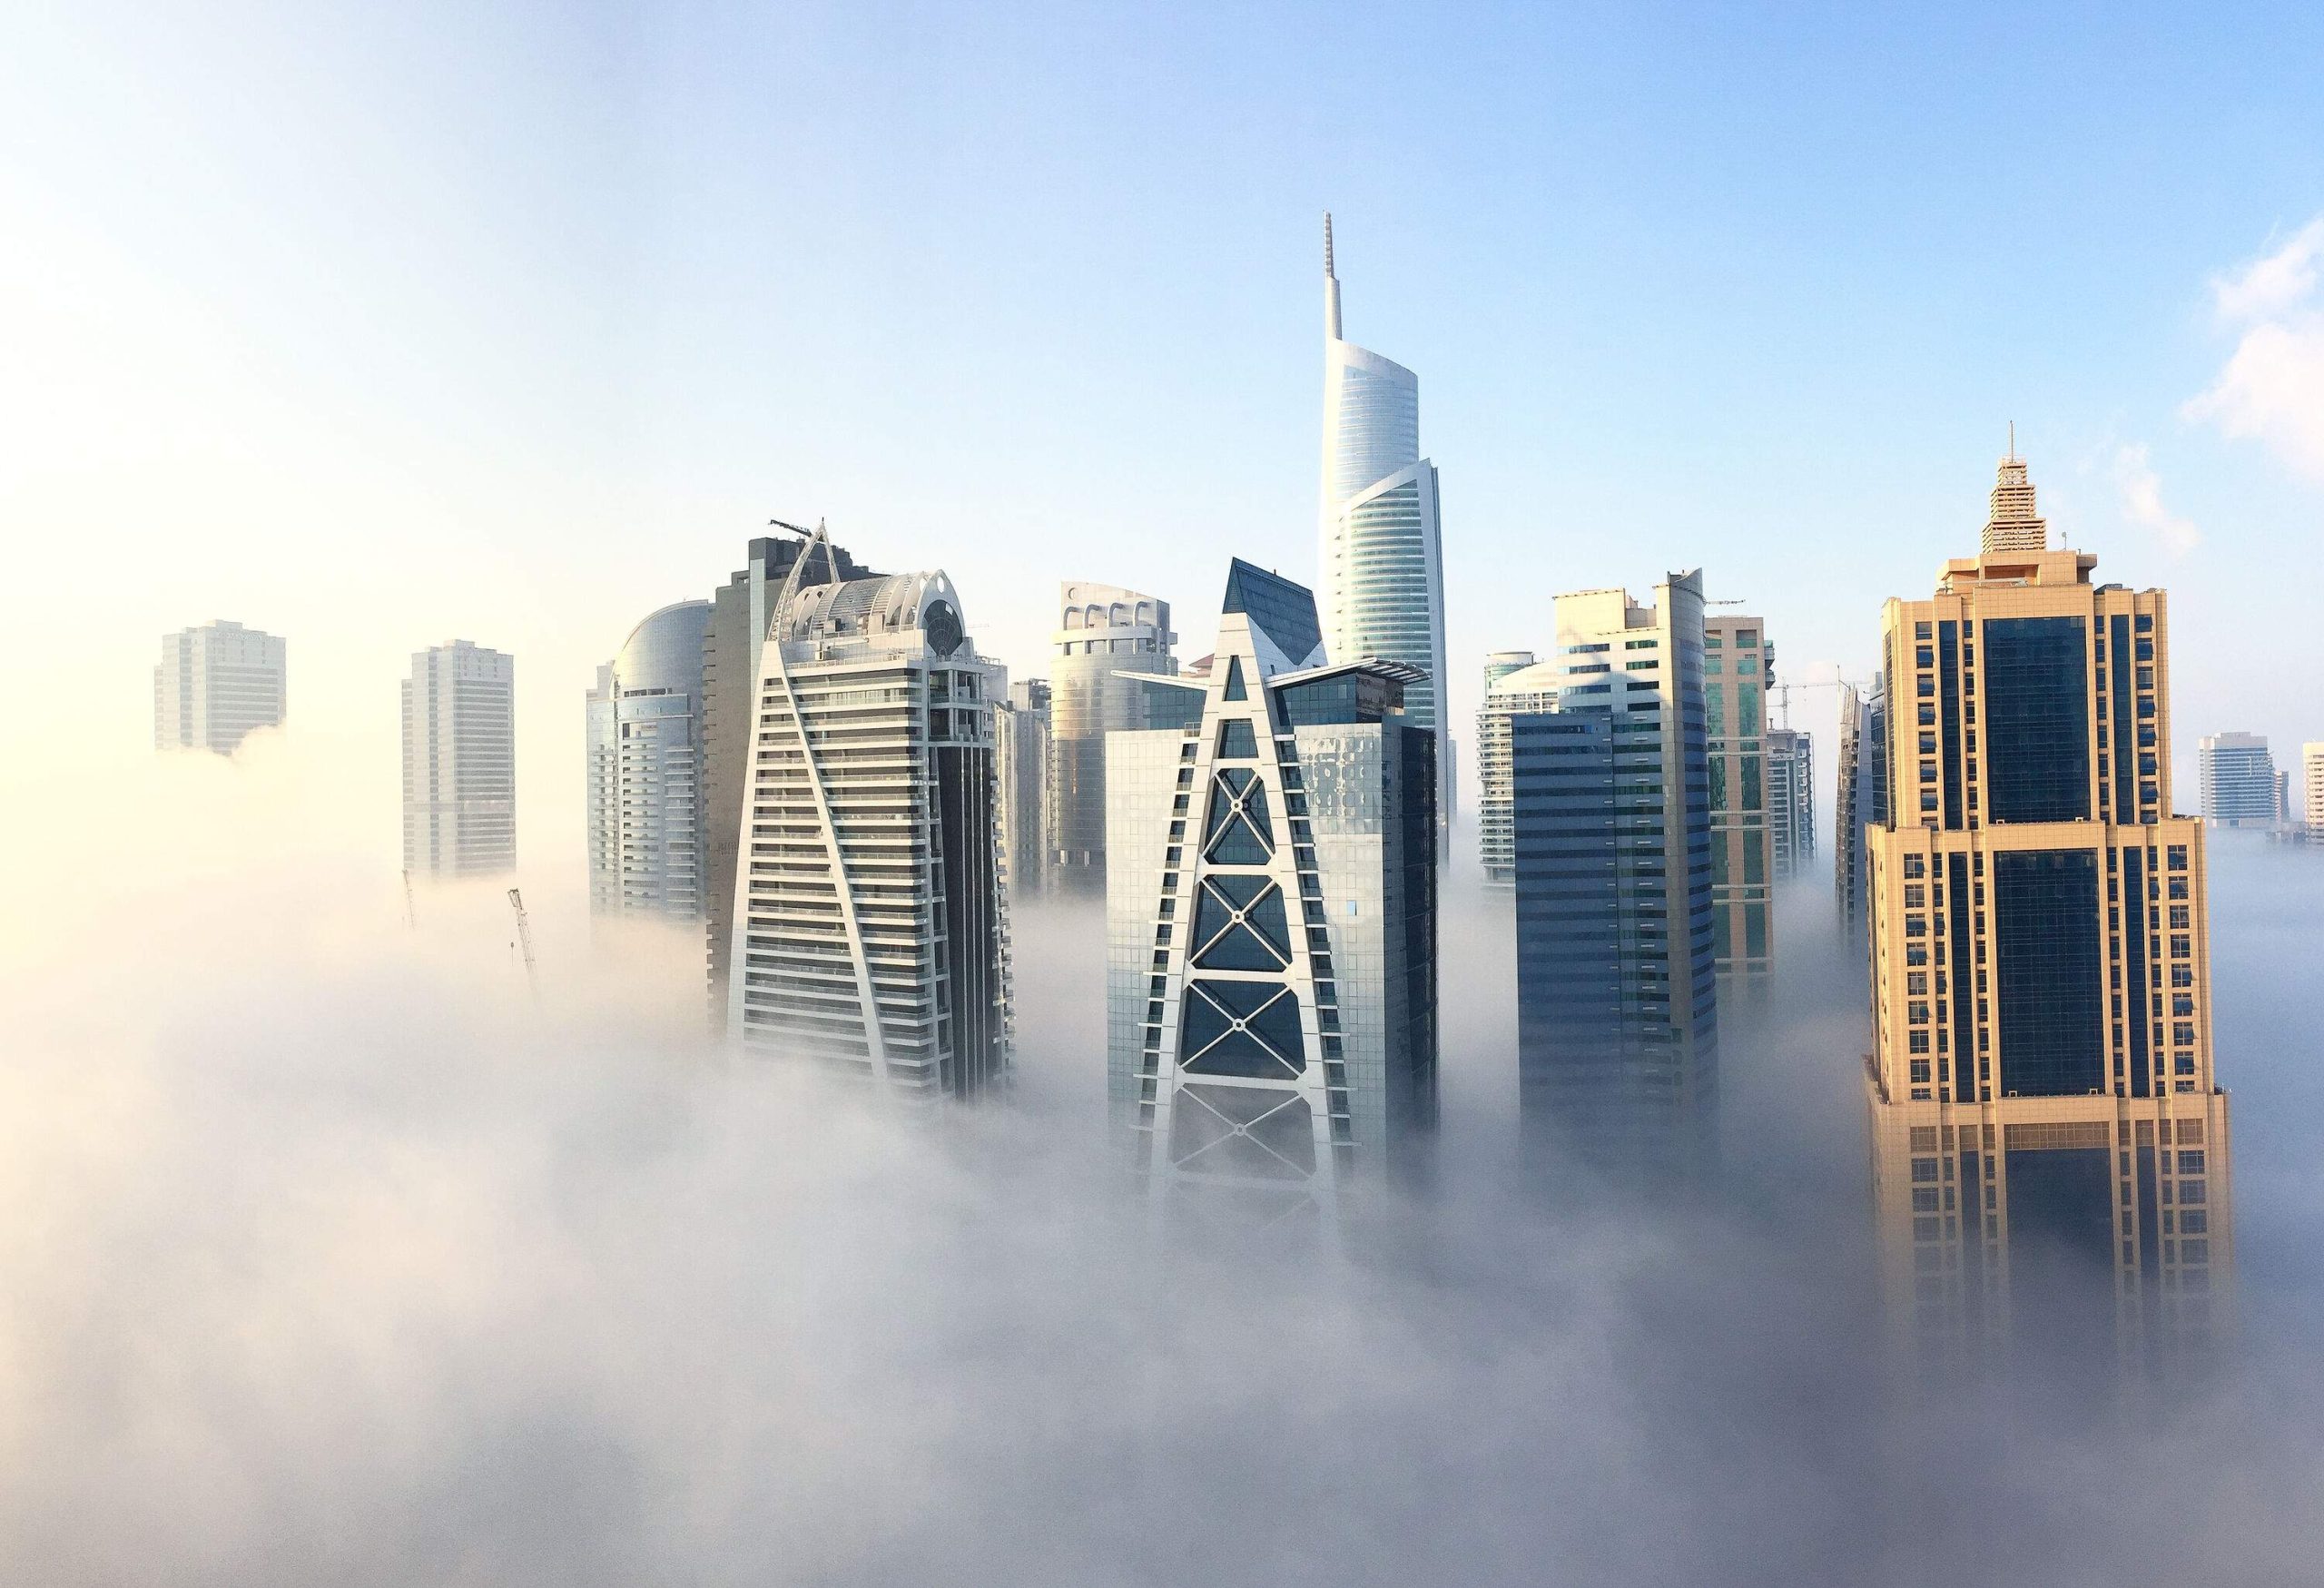 A compact cluster of tall buildings covered with fog.